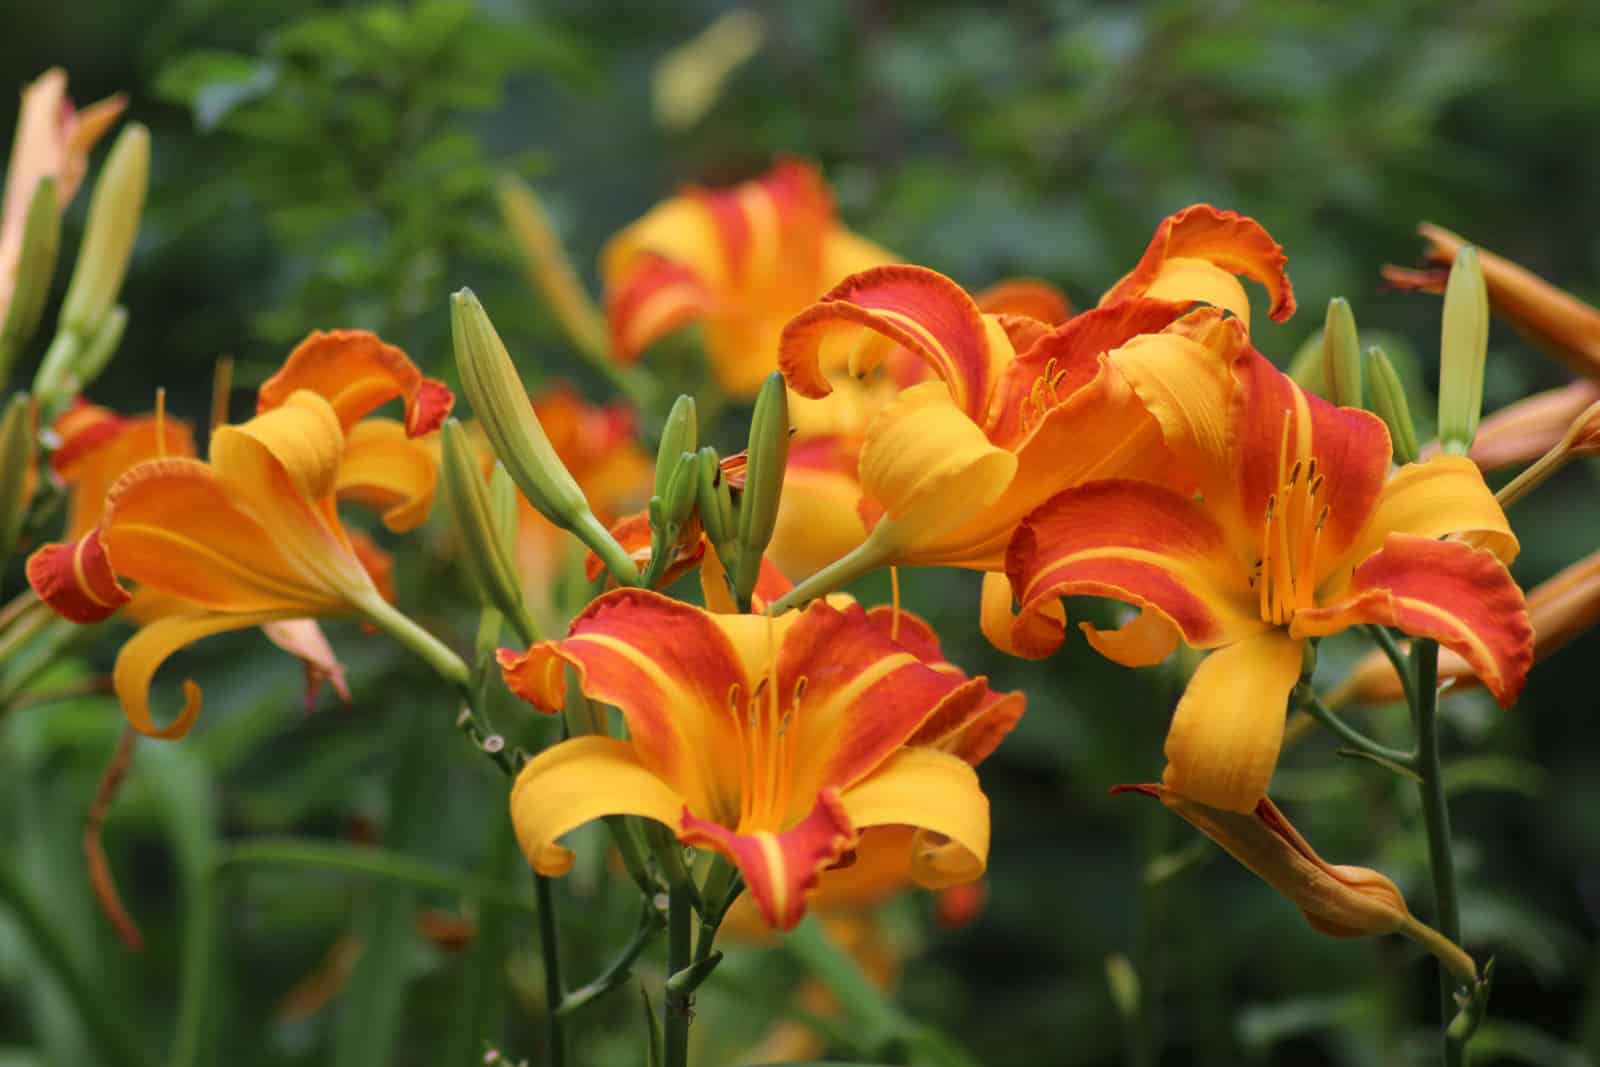 Yellow orange flowers of the daylily